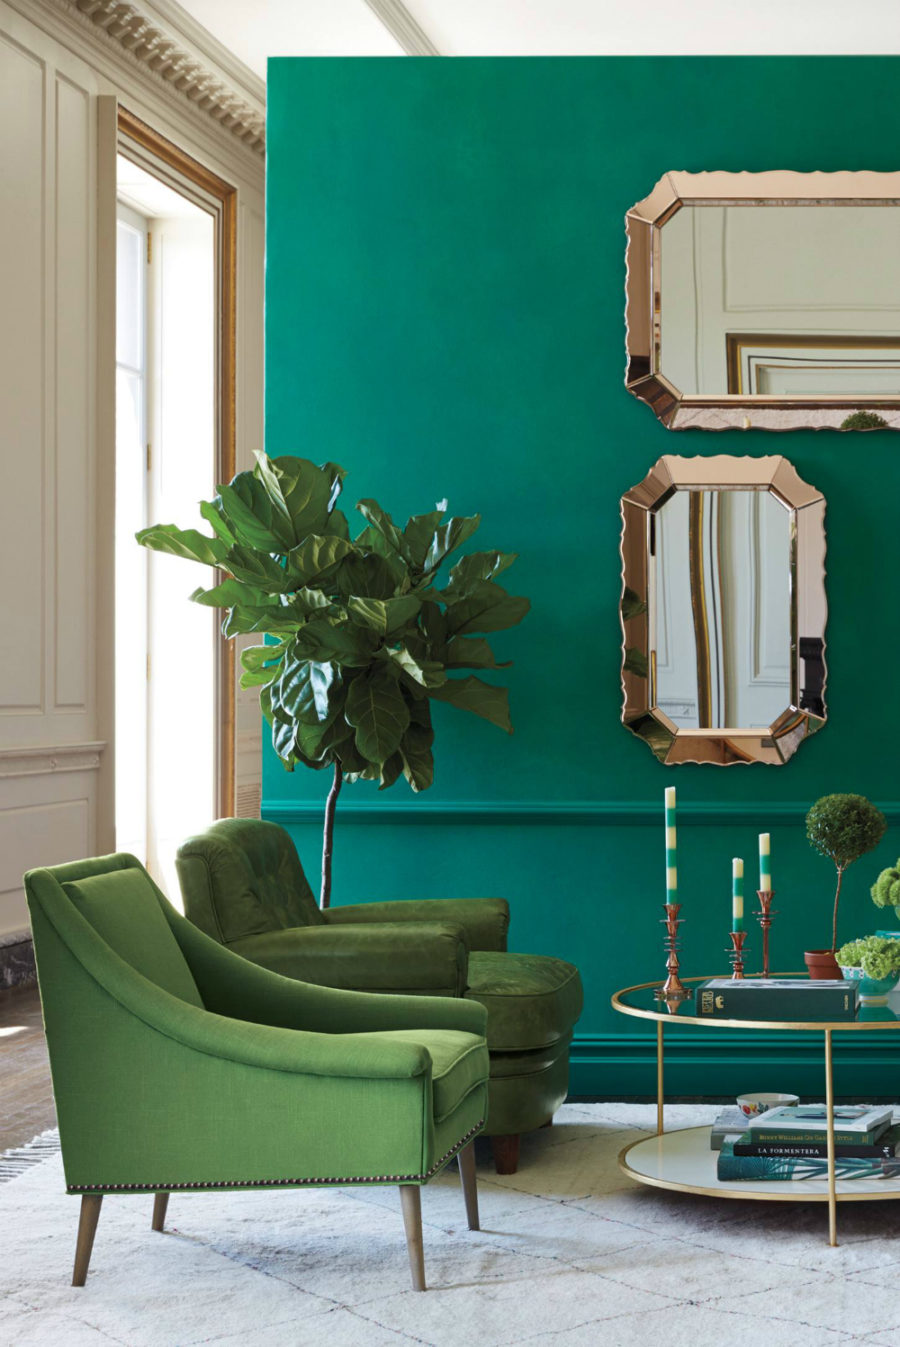 2017 Pantone Color of the Year in 35 Green Designs